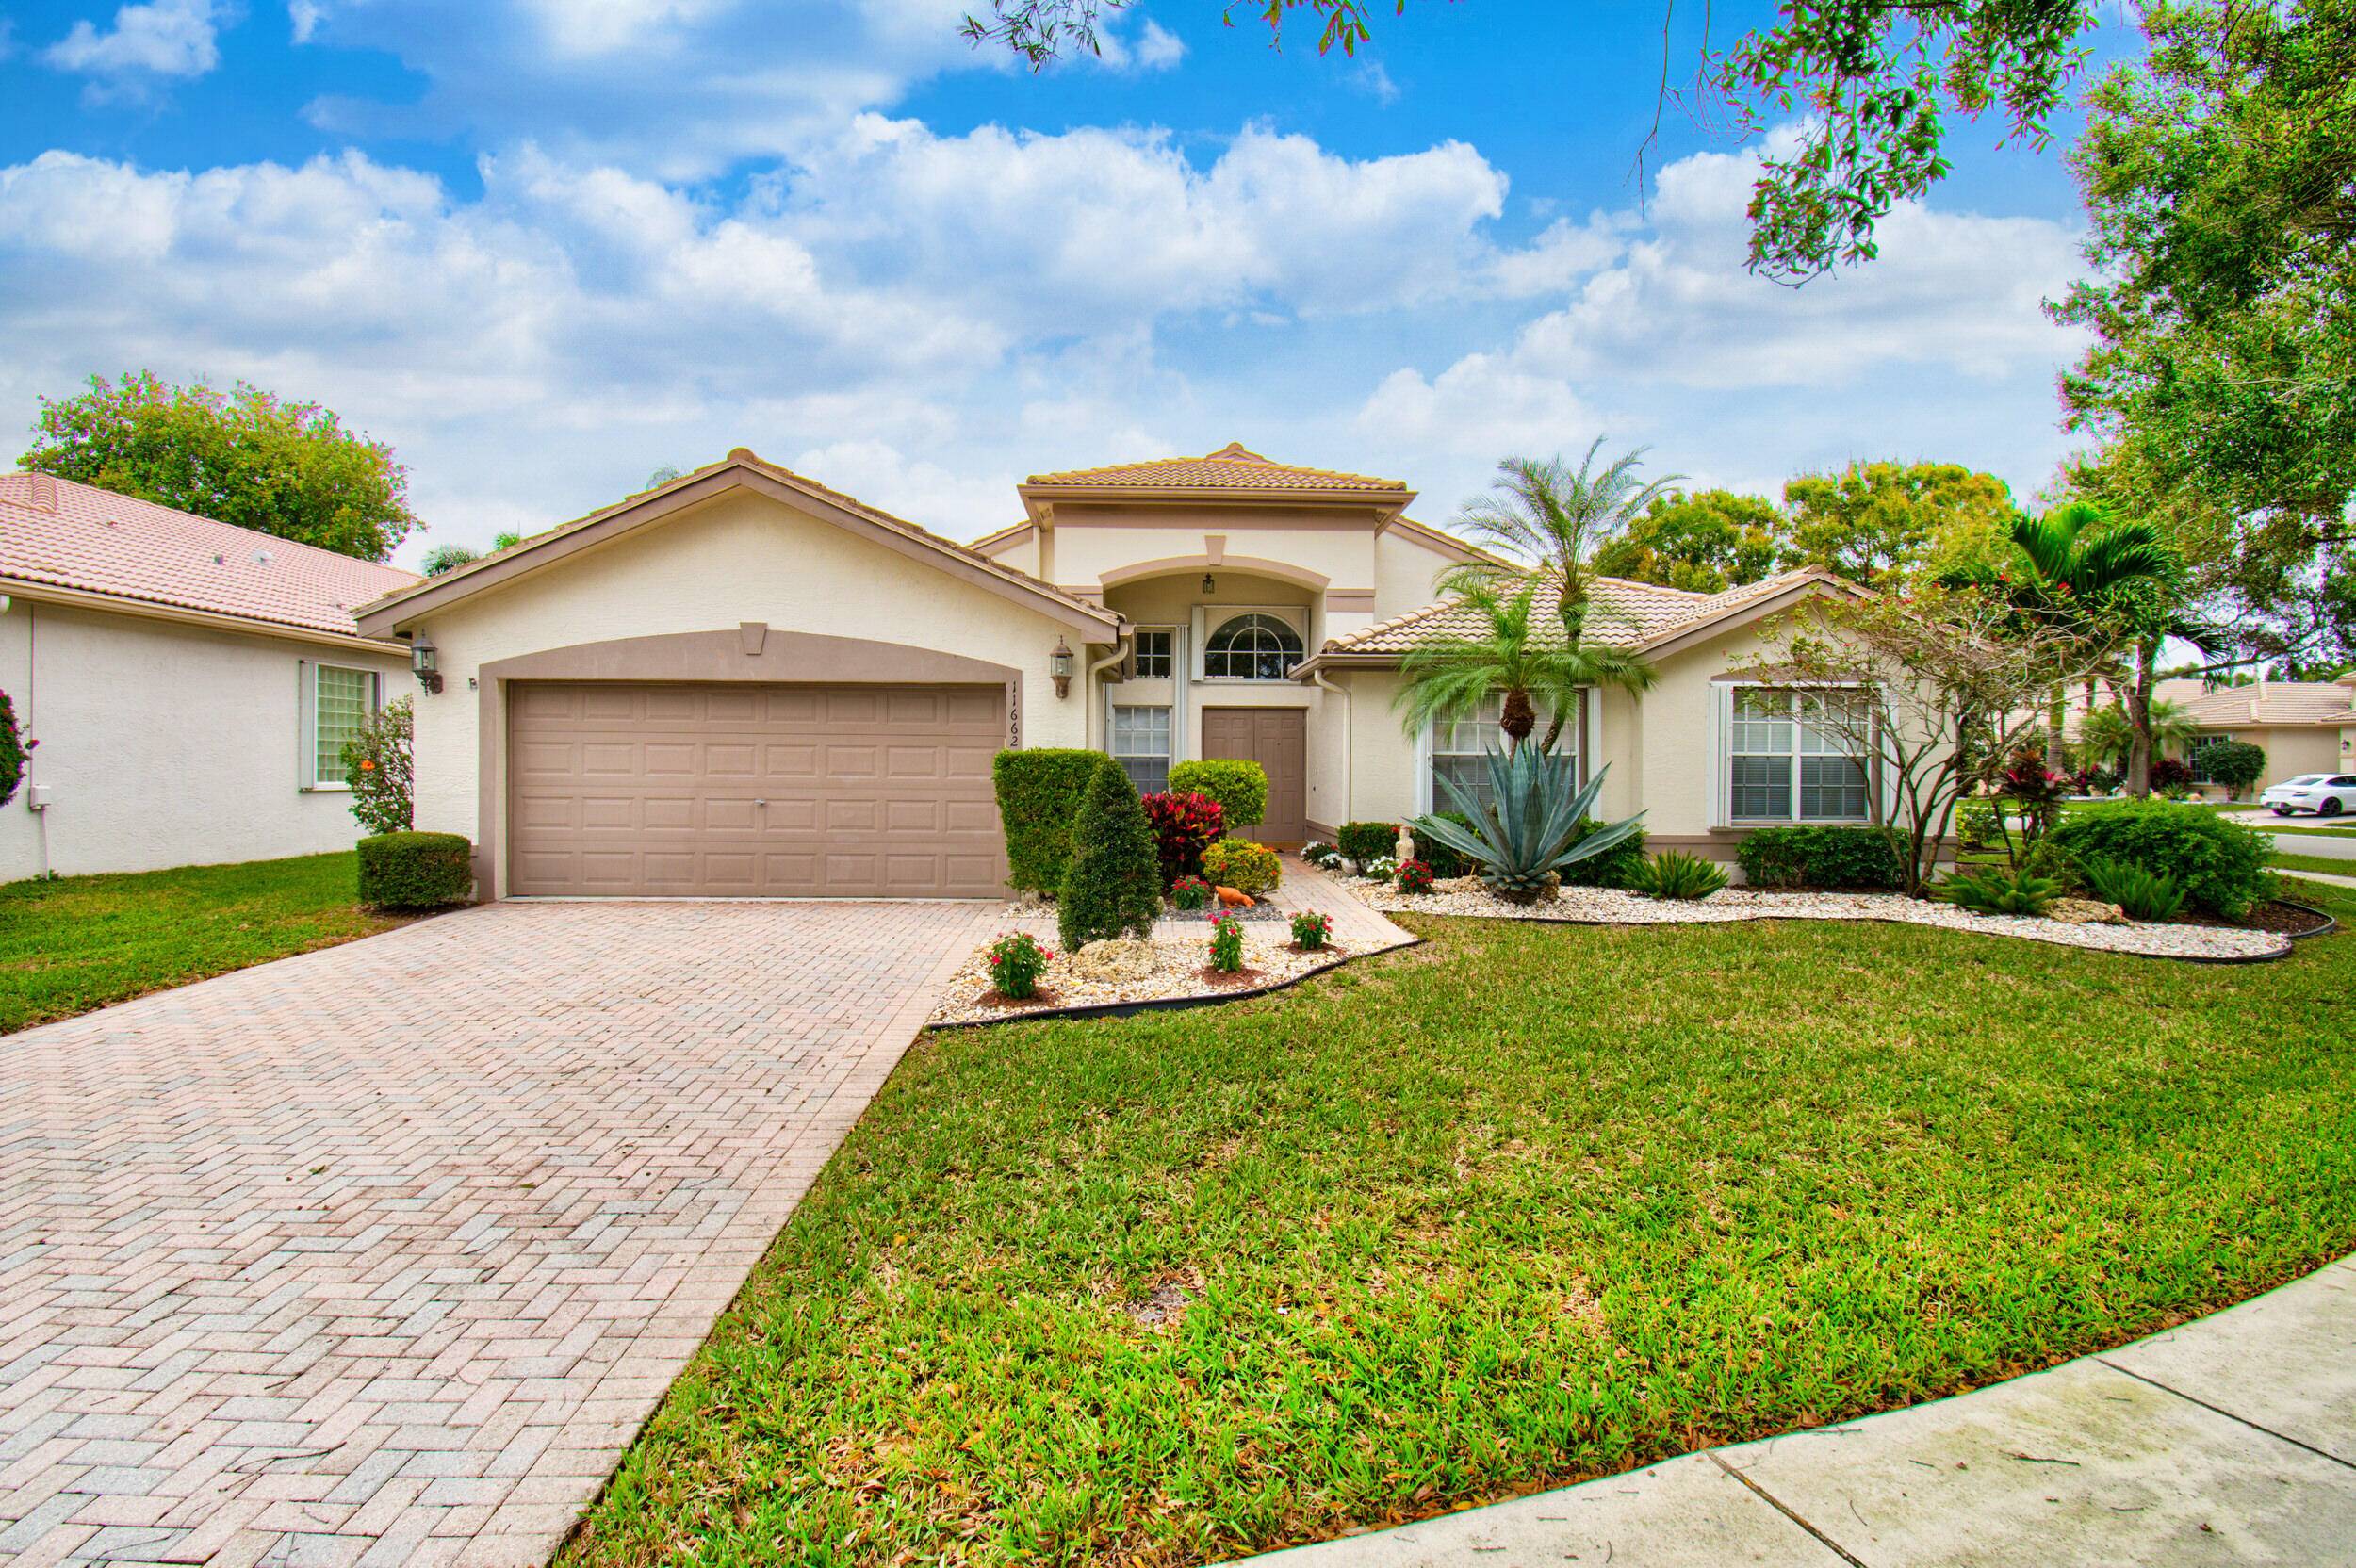 MOTIVATED SELLERS ! LOWEST PRICED Grenada model home located in the prestigious gated community of Valencia Lakes.